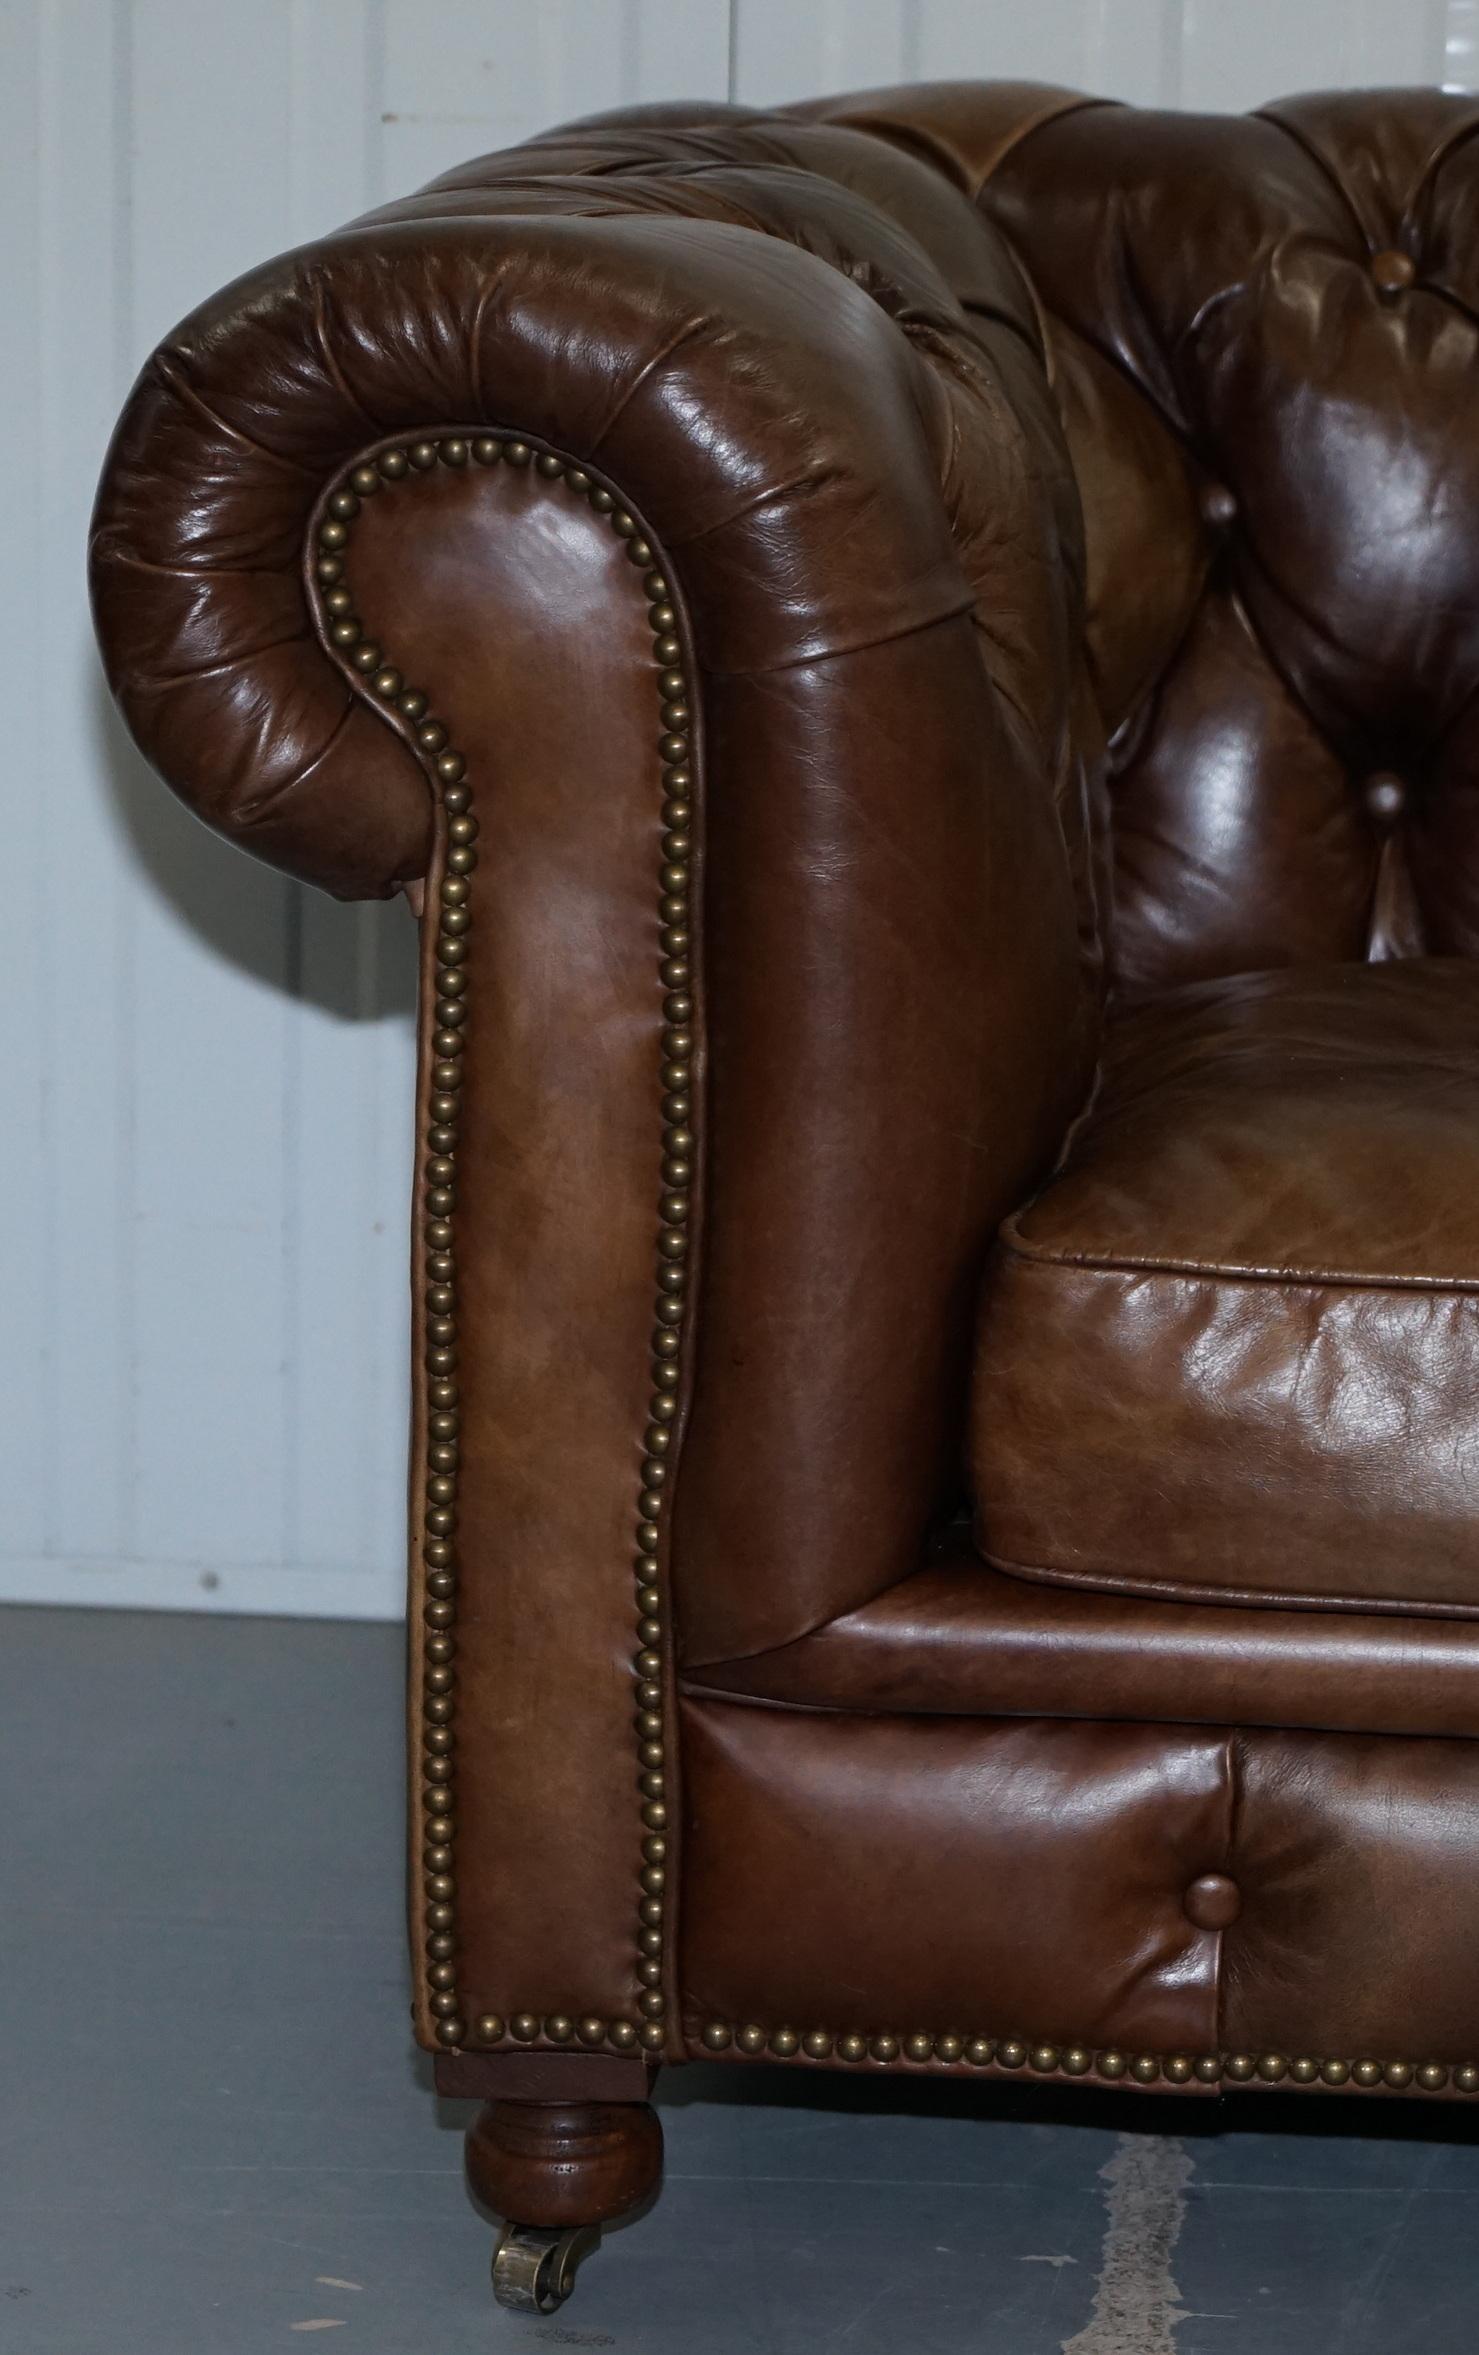 1 of 2 Timothy Oulton Halo Westminster Brown Leather Chesterfield Sofas 2